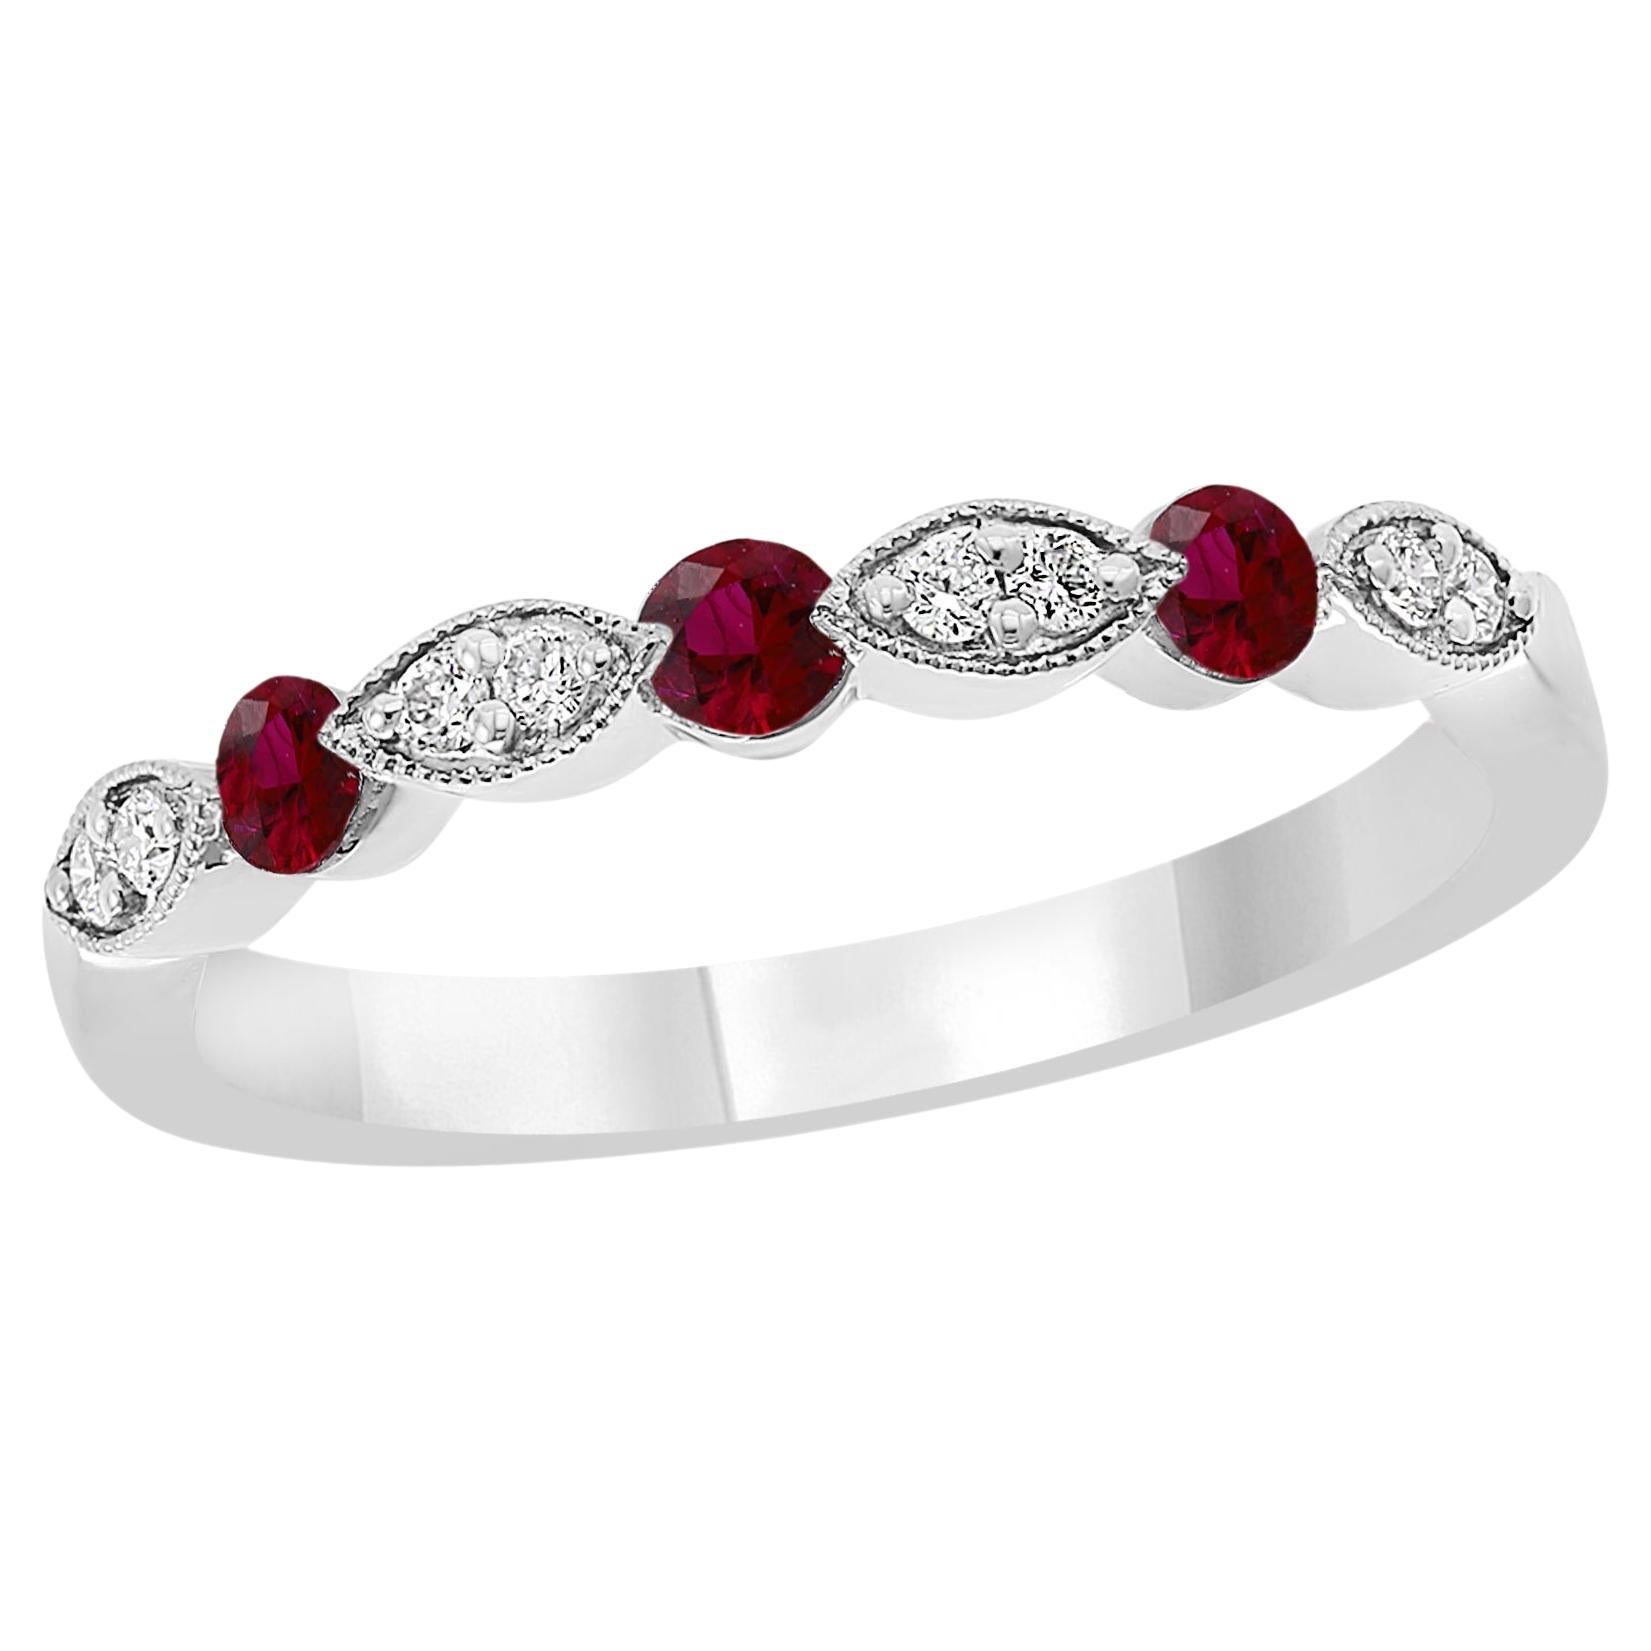 0.37 Carat Antique Style Ruby and Diamond Wedding Band in 18K White Gold